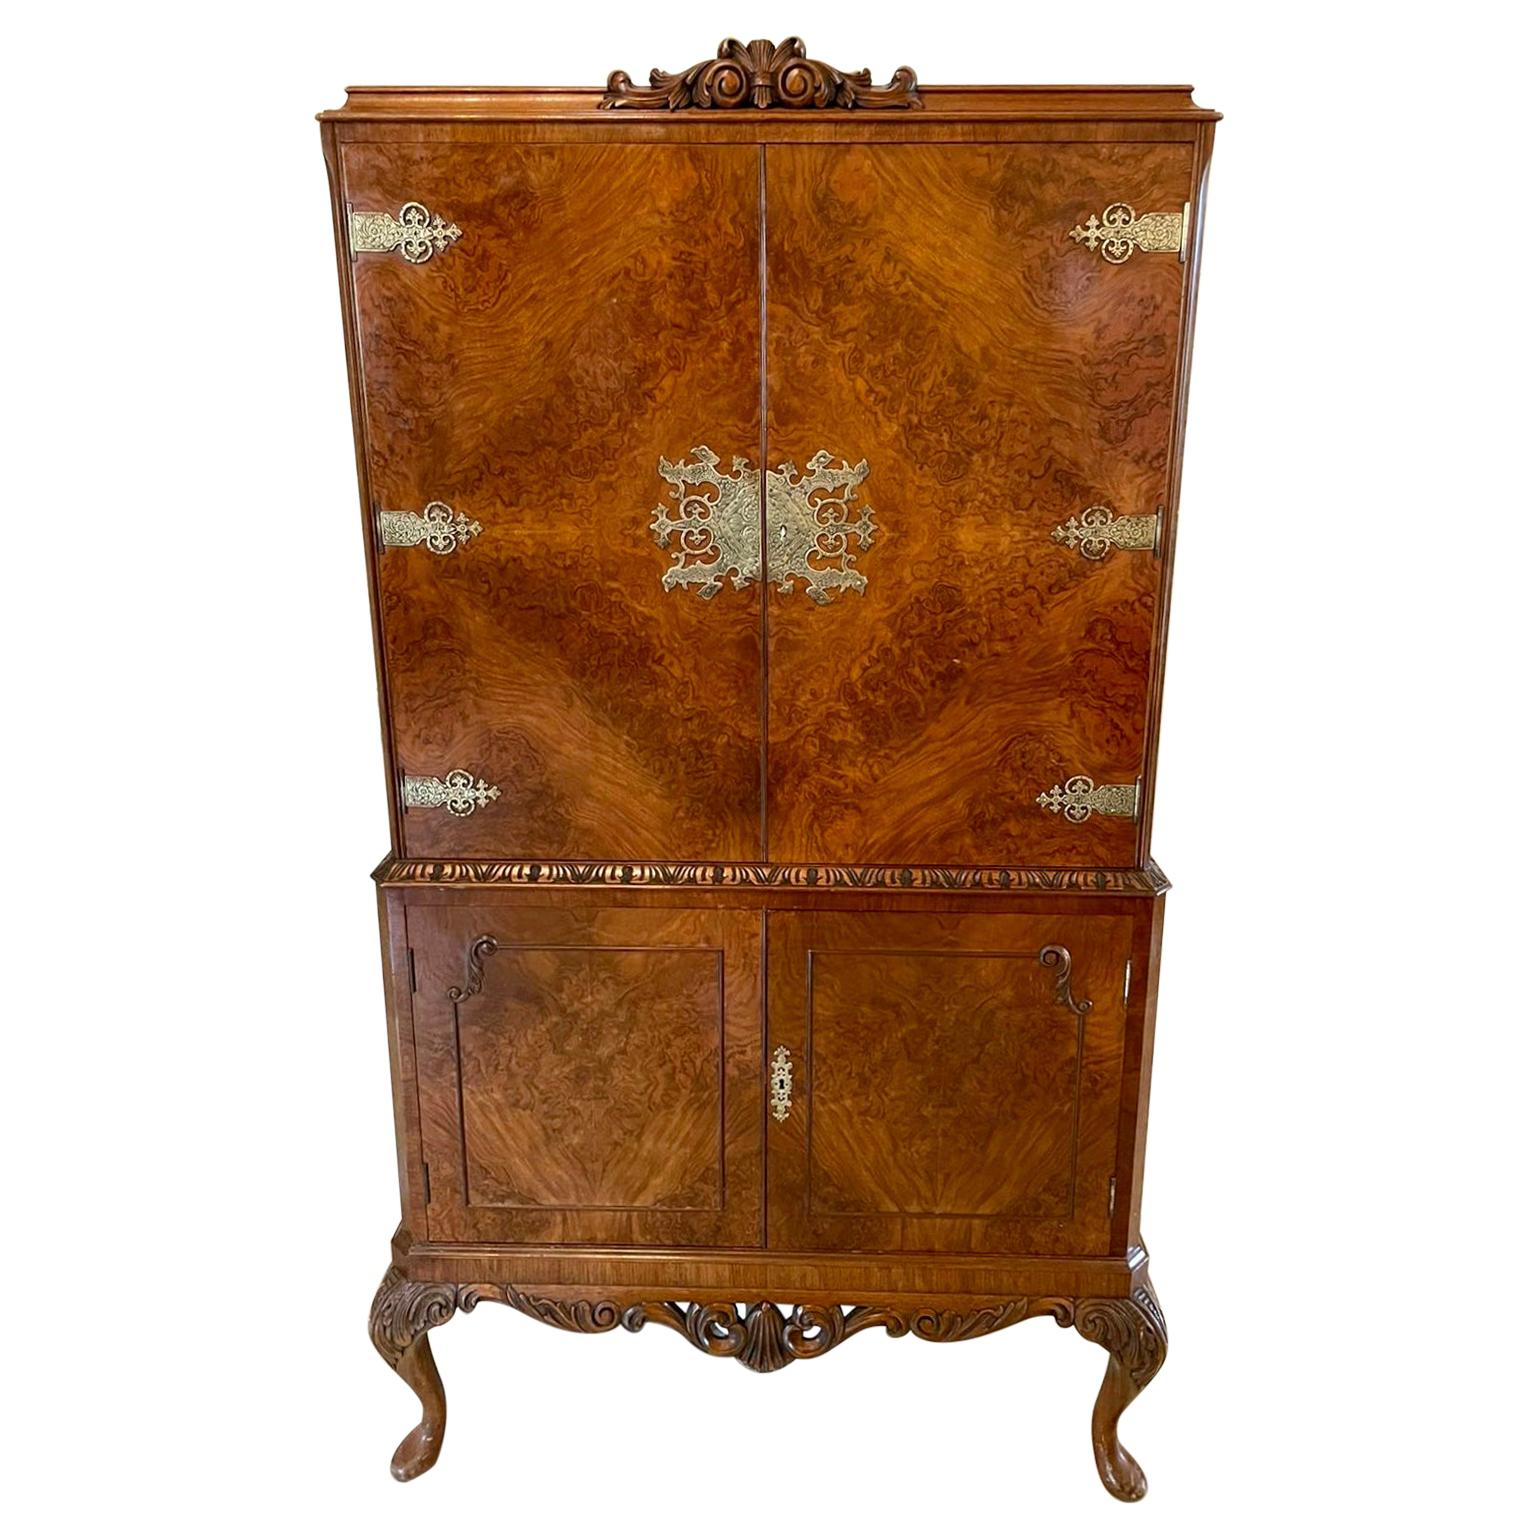 Outstanding Quality Antique Burr Walnut Cocktail Cabinet